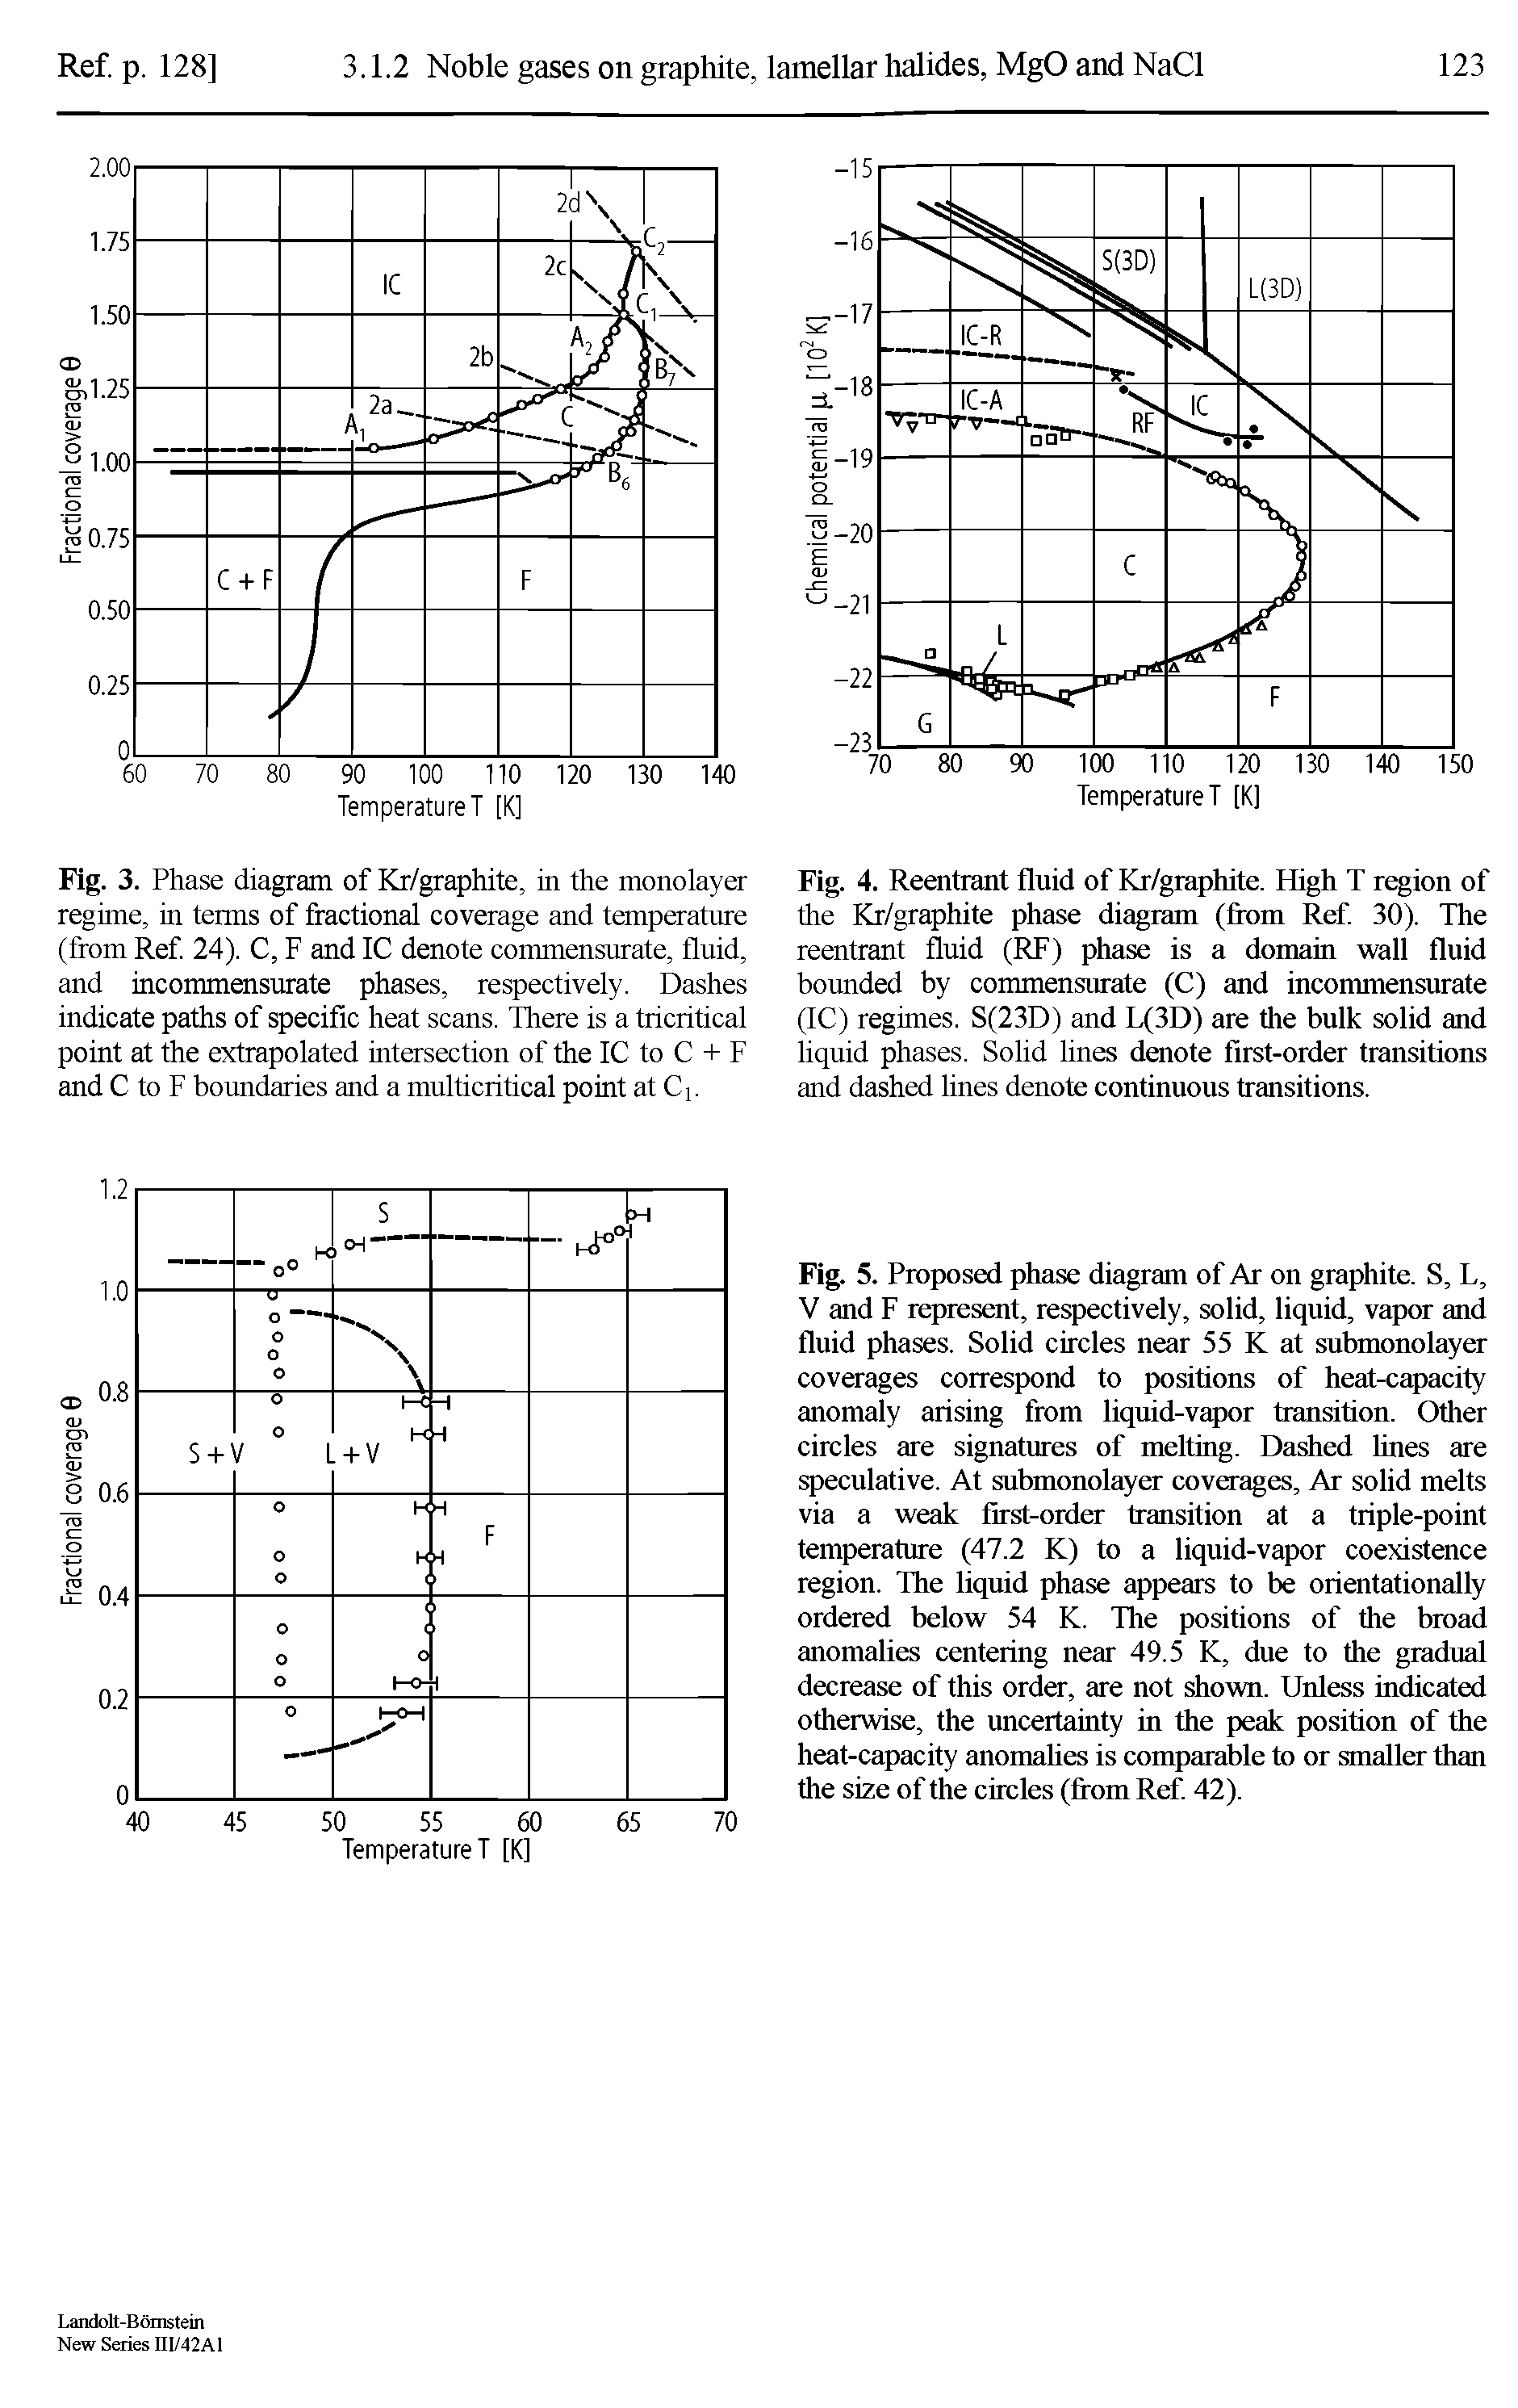 Fig. 4. Reentrant fluid of Kr/graphite. High T region of the Kr/graphite phase diagram (from Ref. 30). The reentrant fluid (RF) phase is a domain wall fluid bounded by commensurate (C) and incommensurate (IC) regimes. S(23D) and L(3D) are the bulk solid and hquid phases. Sohd lines denote first-order transitions and dashed lines denote continuous transitions.